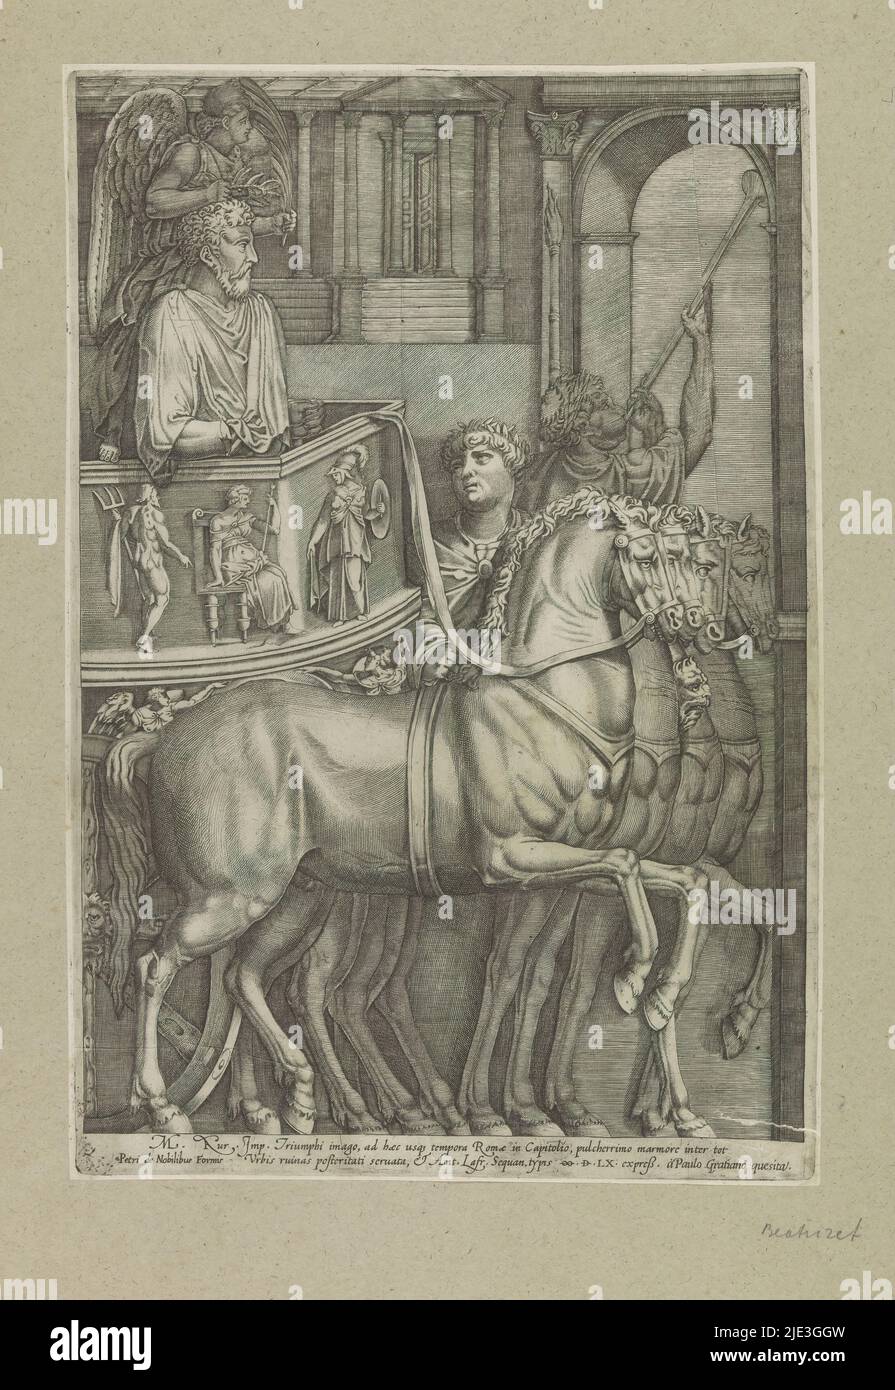 Triumph of Emperor Marcus Aurelius, M. Aure. Imp. Triumphi imago, ad haec usqe tempora Romae in Capitol (...), Emperor Marcus Aurelius stands on a triumphal chariot pulled by four horses. On the right, a man blowing a trumpet. The print is part of an album., print maker: Nicolas Beatrizet, after sculpture by: anonymous, publisher: Antonio Lafreri, (mentioned on object), print maker: Italy, after sculpture by: Italy, publisher: Rome, 1560, paper, engraving, height 430 mm × width 287 mm Stock Photo